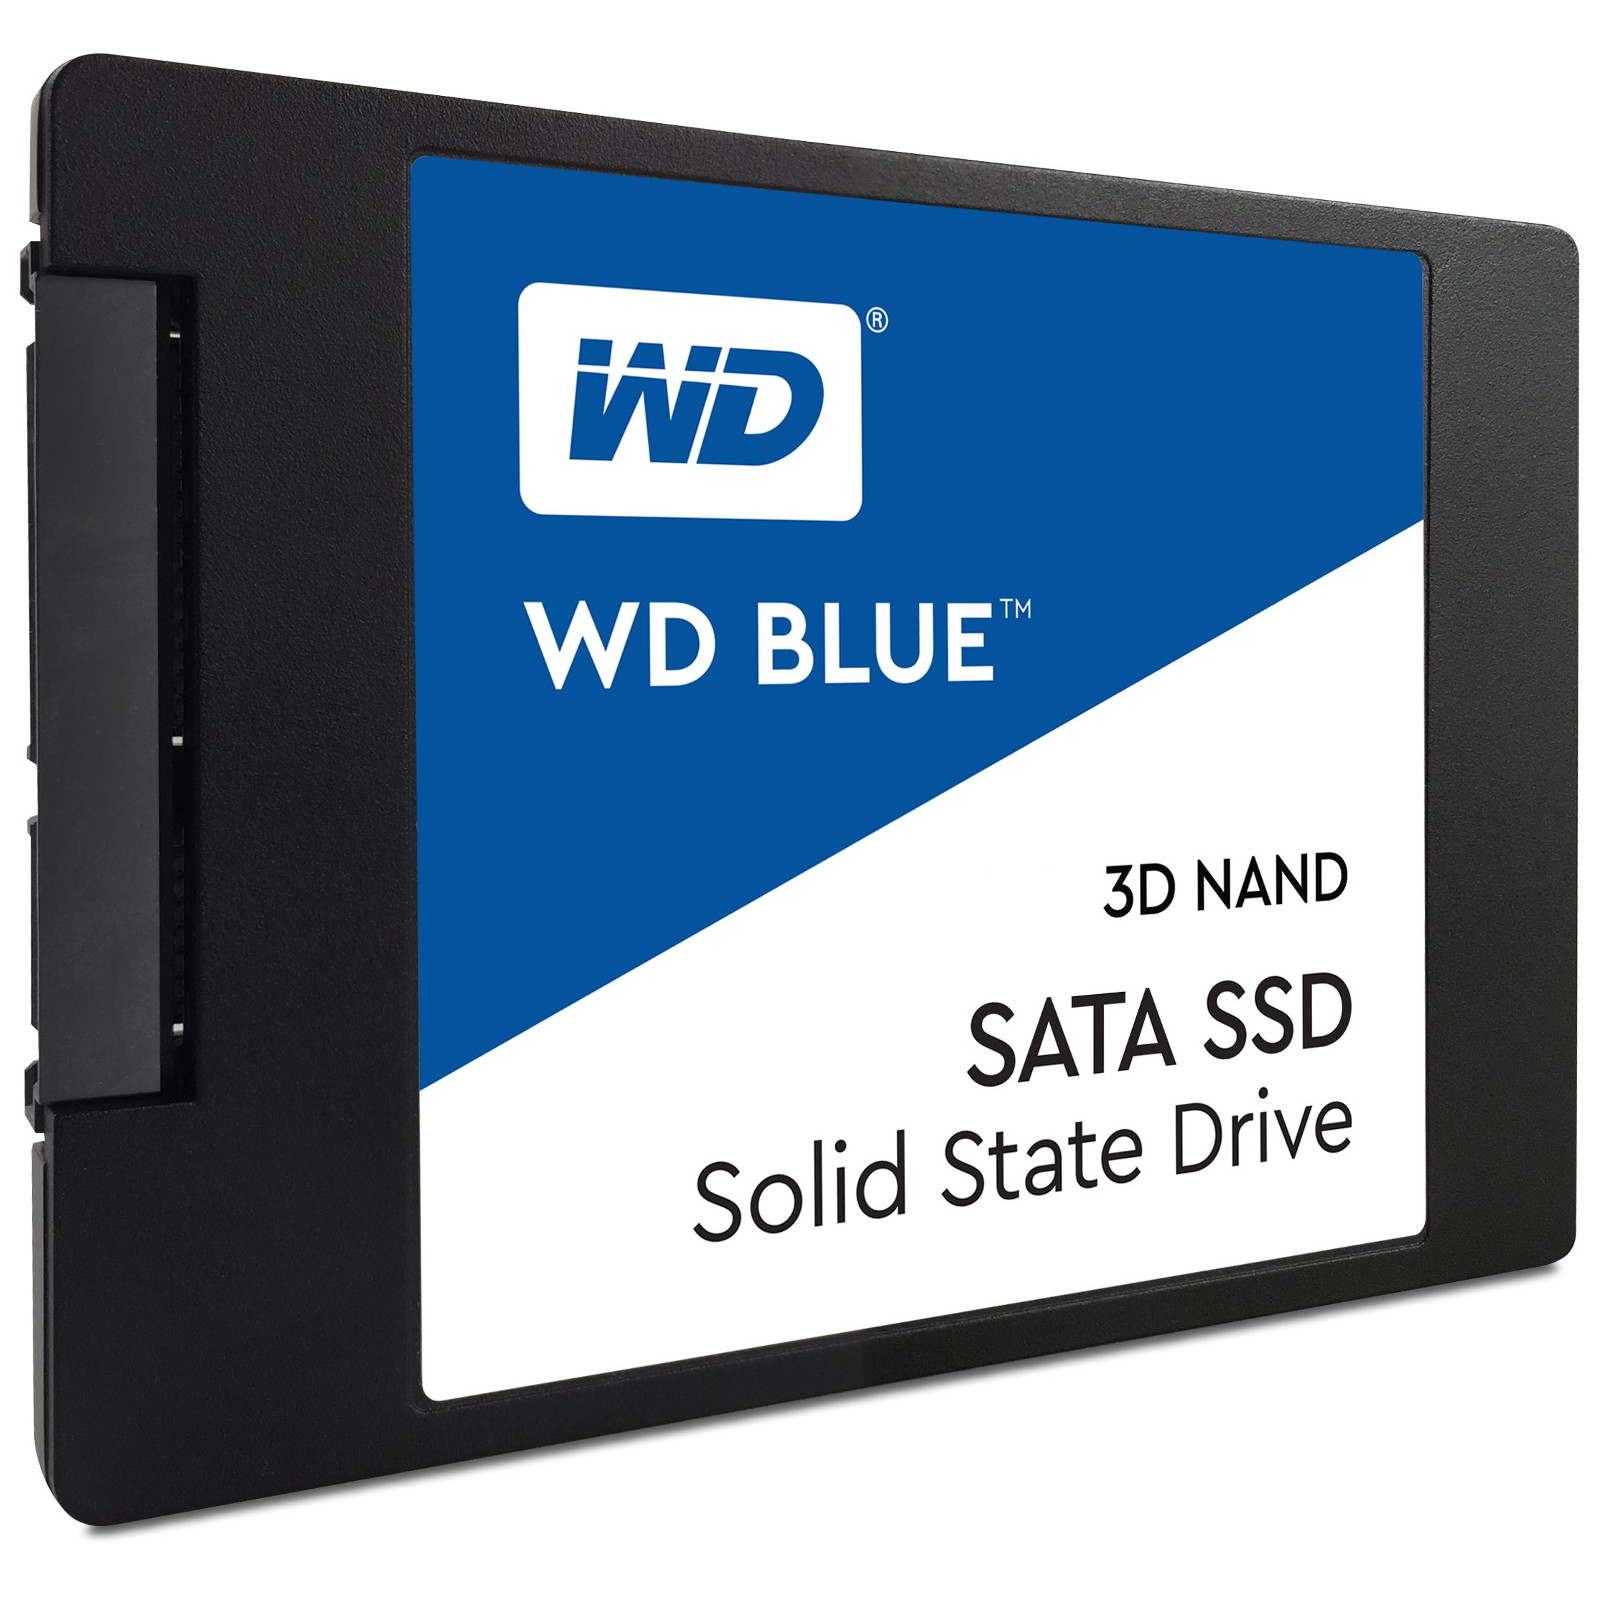 WD - WD Blue 250GB 3D NAND SSD 2.5 SATA 6Gbps Solid State Drive (WDS250G2B0A)